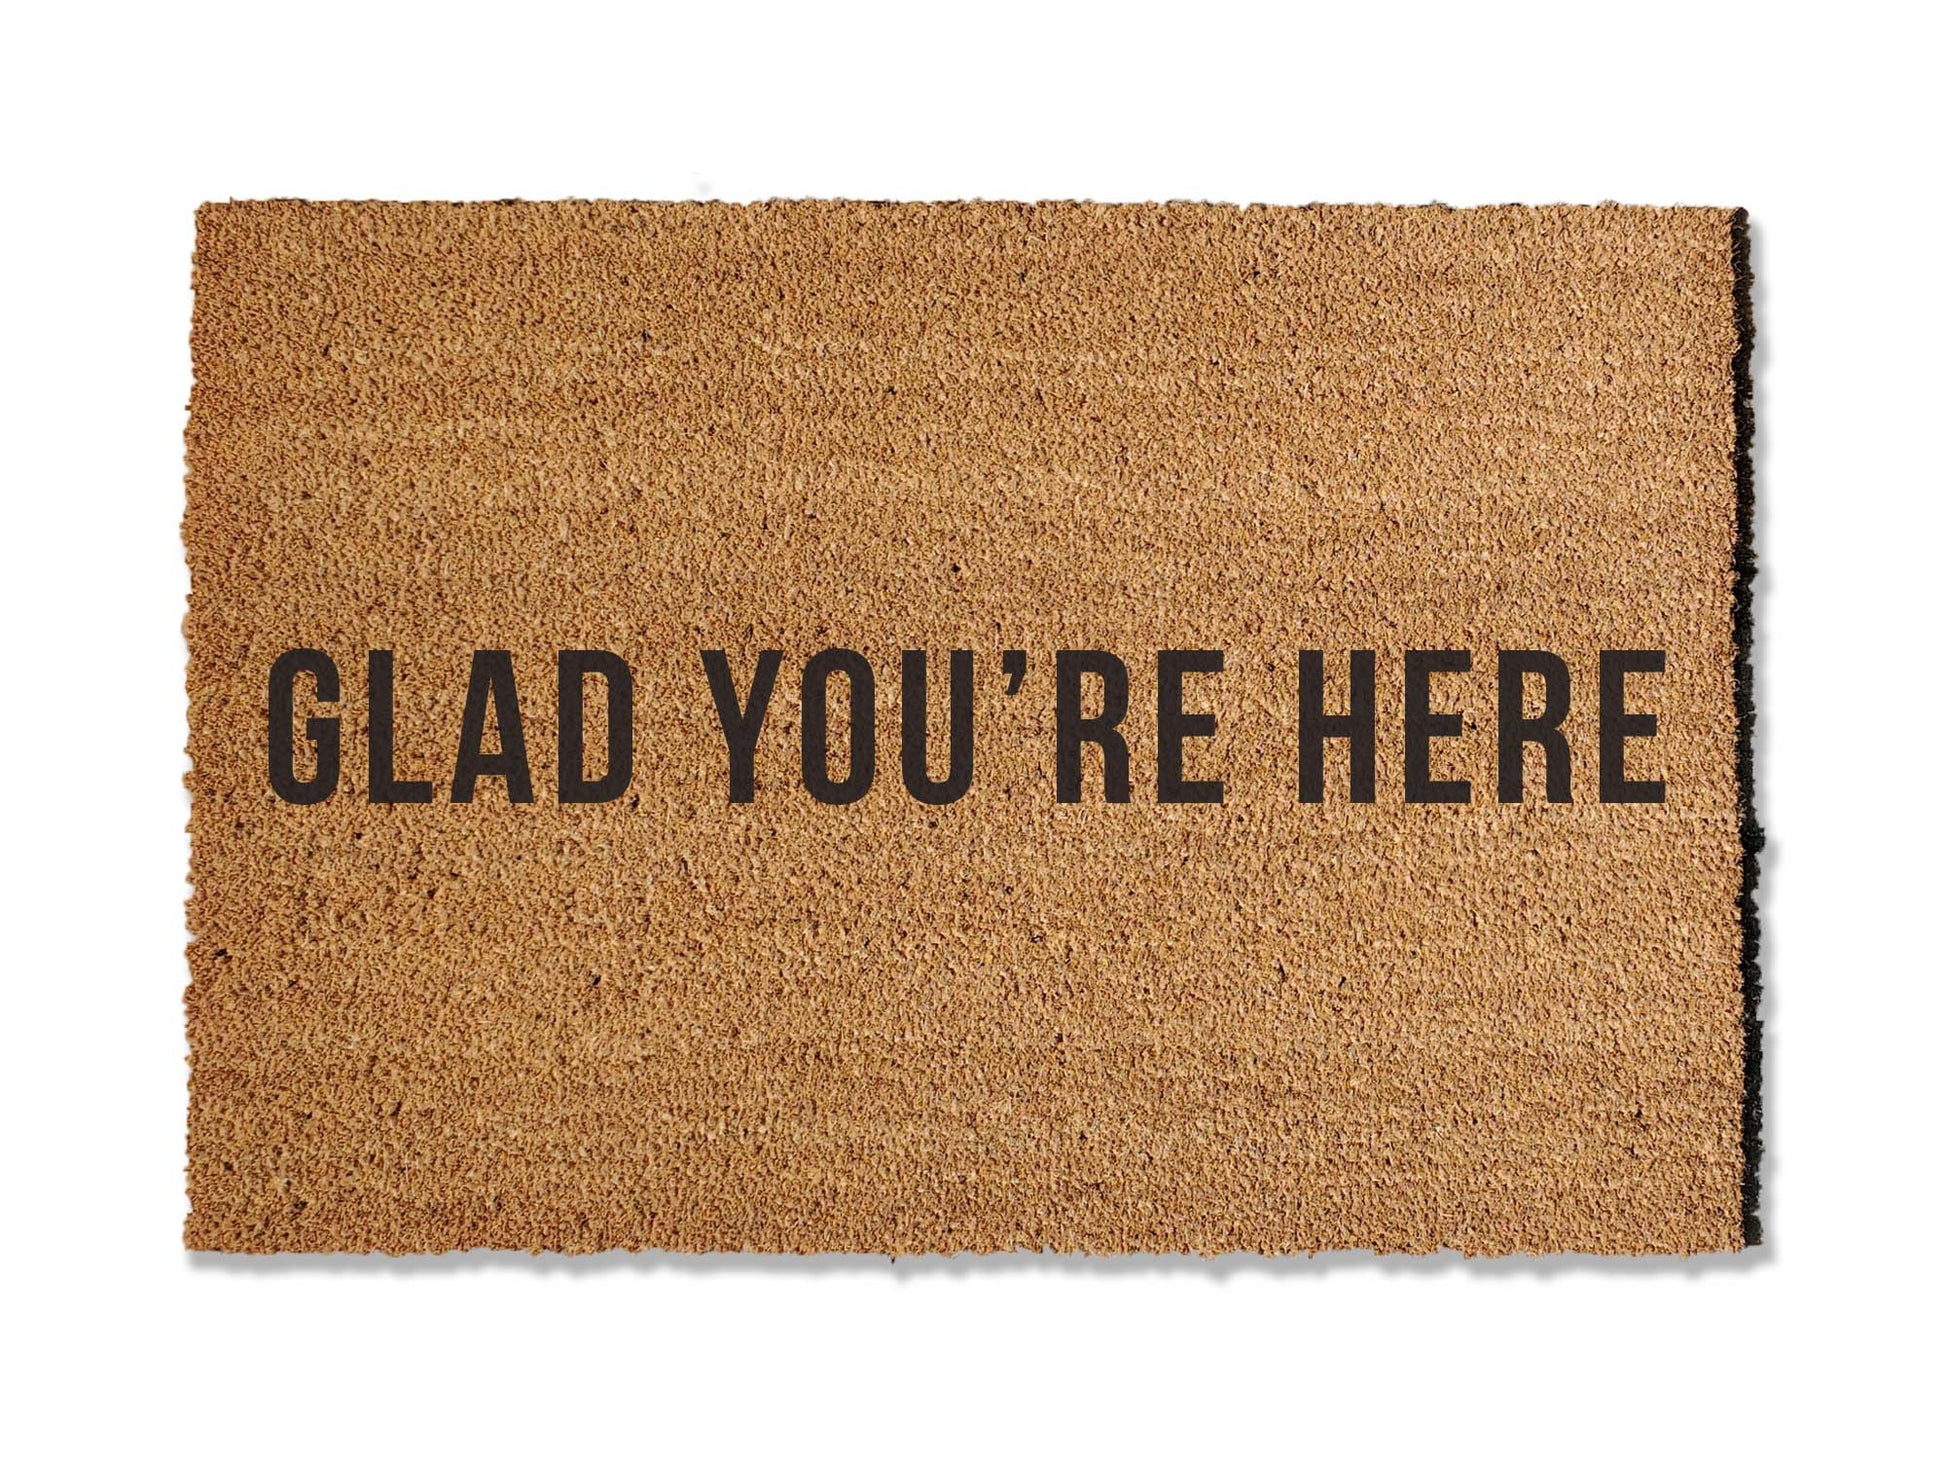 Extend a warm welcome with our 'GLAD YOU'RE HERE' coir doormat, available in various sizes. Perfect for both function and style, this charming mat invites guests into your home while effectively keeping dirt at bay. Choose the ideal size to enhance your entryway.